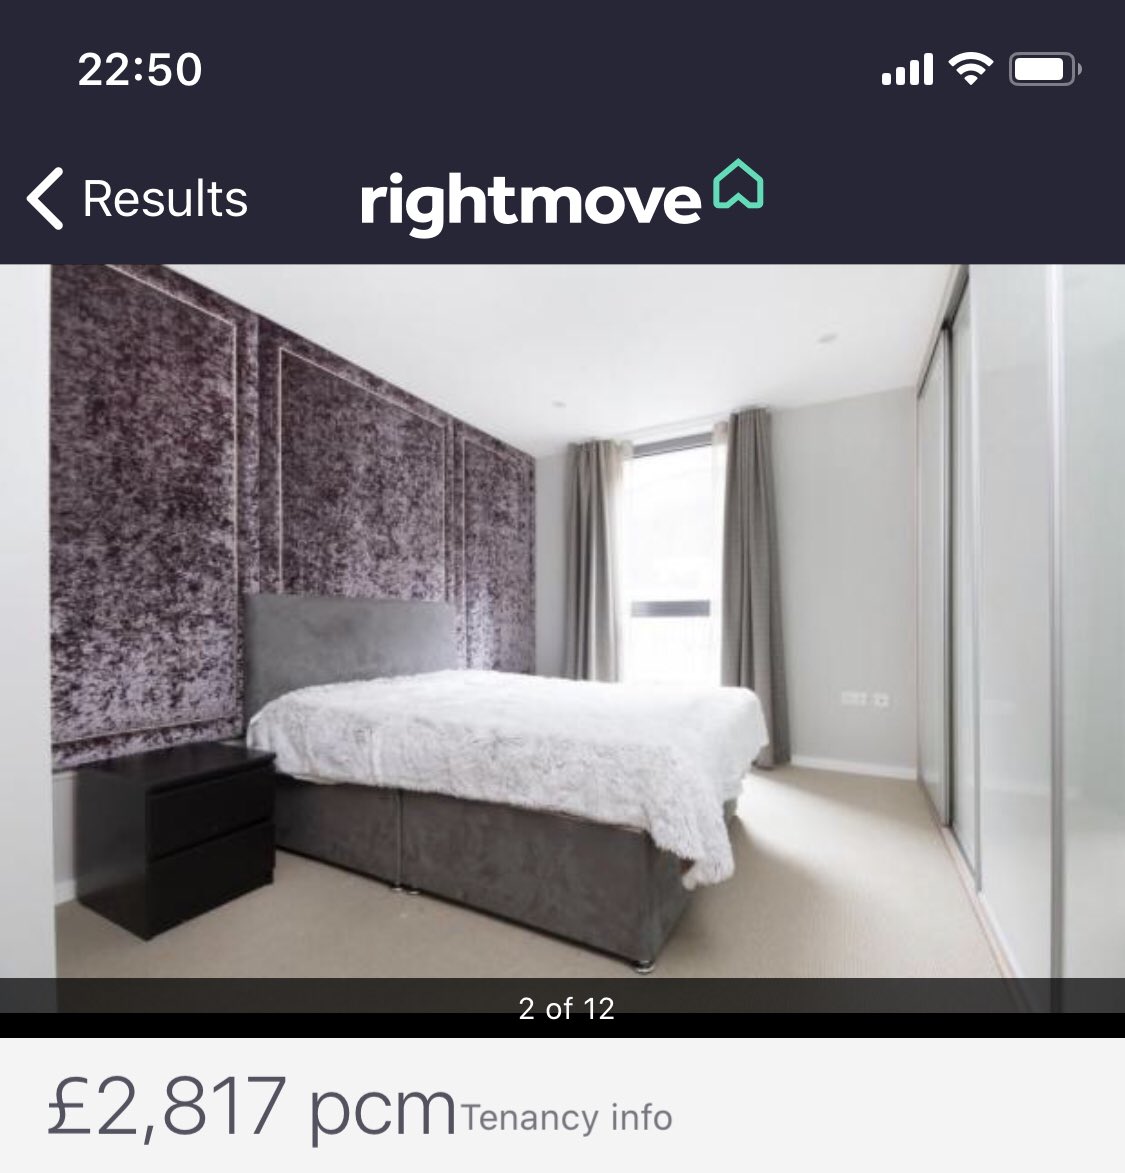 We didn’t get the flat :( someone scooped in with a similar offer but was faster. Heartbroken, but the  #londonrental show must go on. Sad I have to still look at properties that either have abysmal design choices or are simply f-ing dirty & still over 2k (notice the bed). Gross